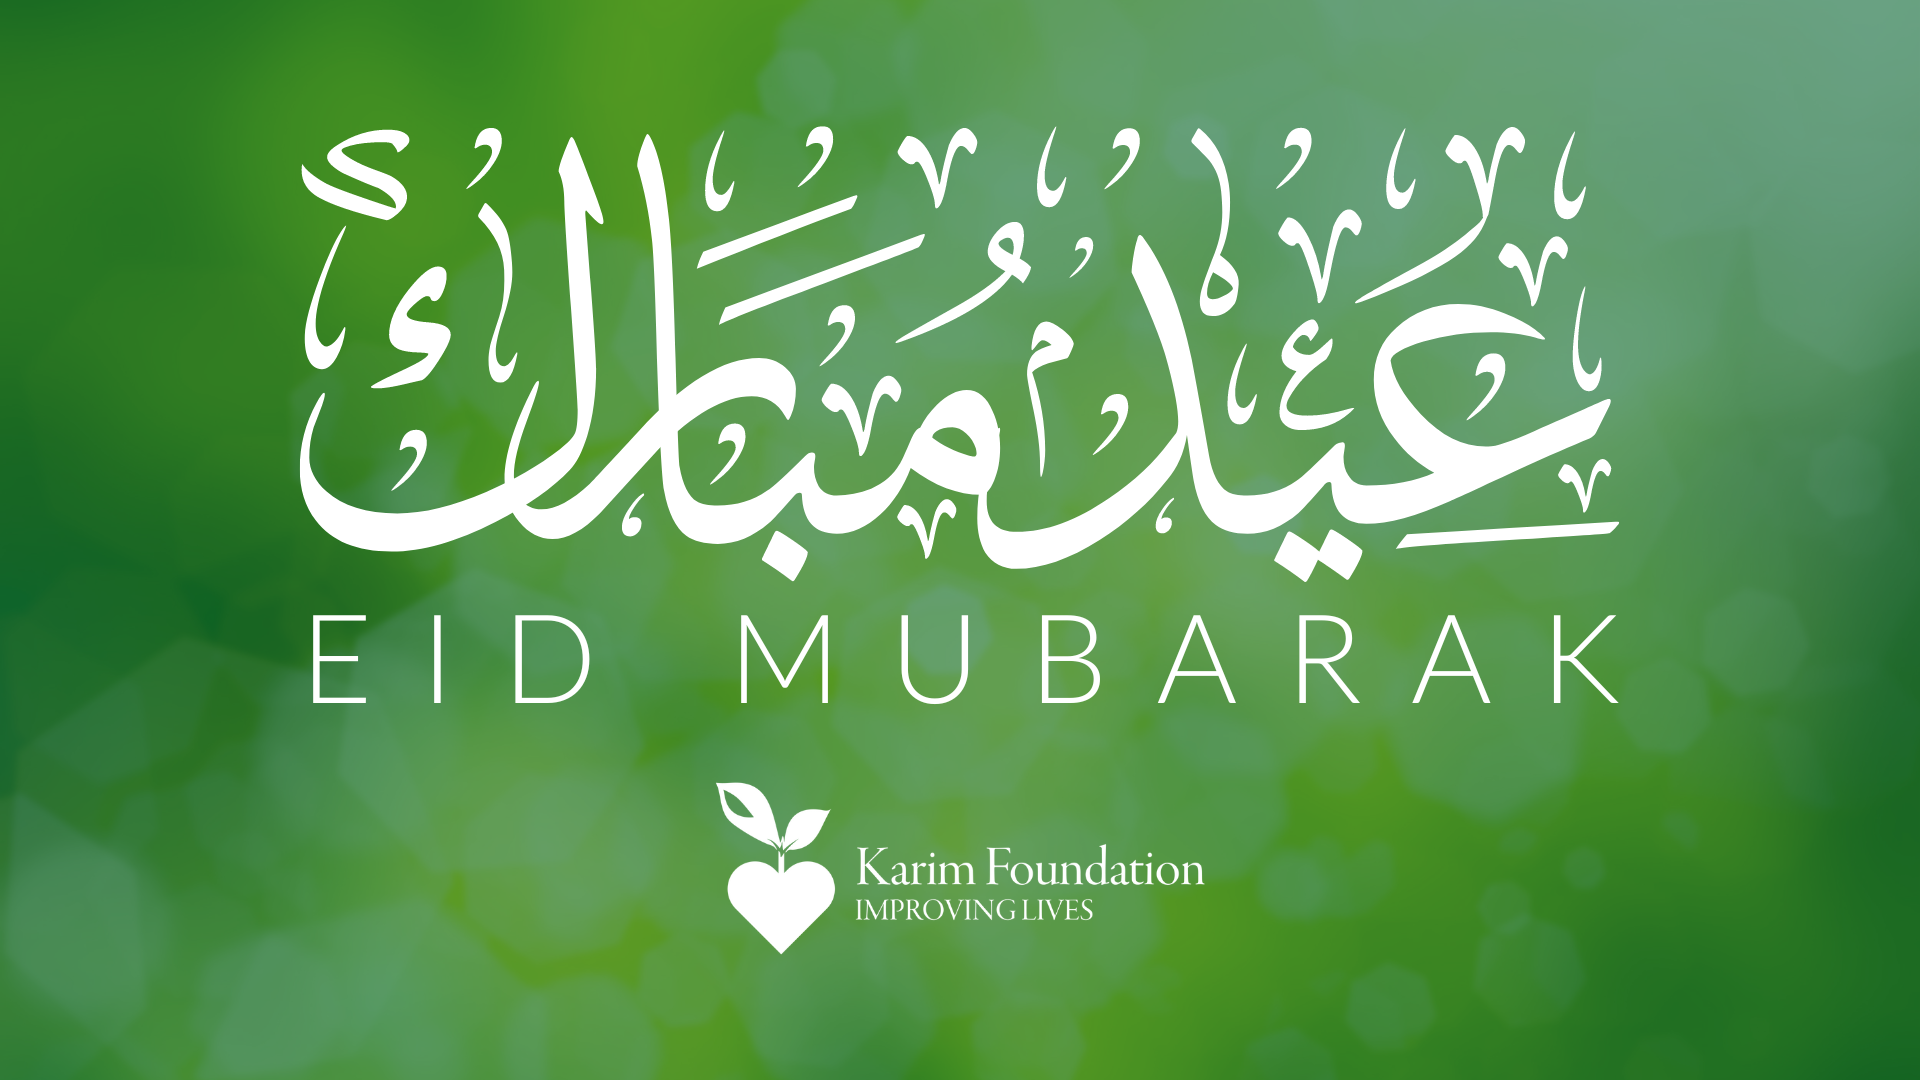 A graphic image displaying Eid Mubarak in Arabic and English against a textured green background.